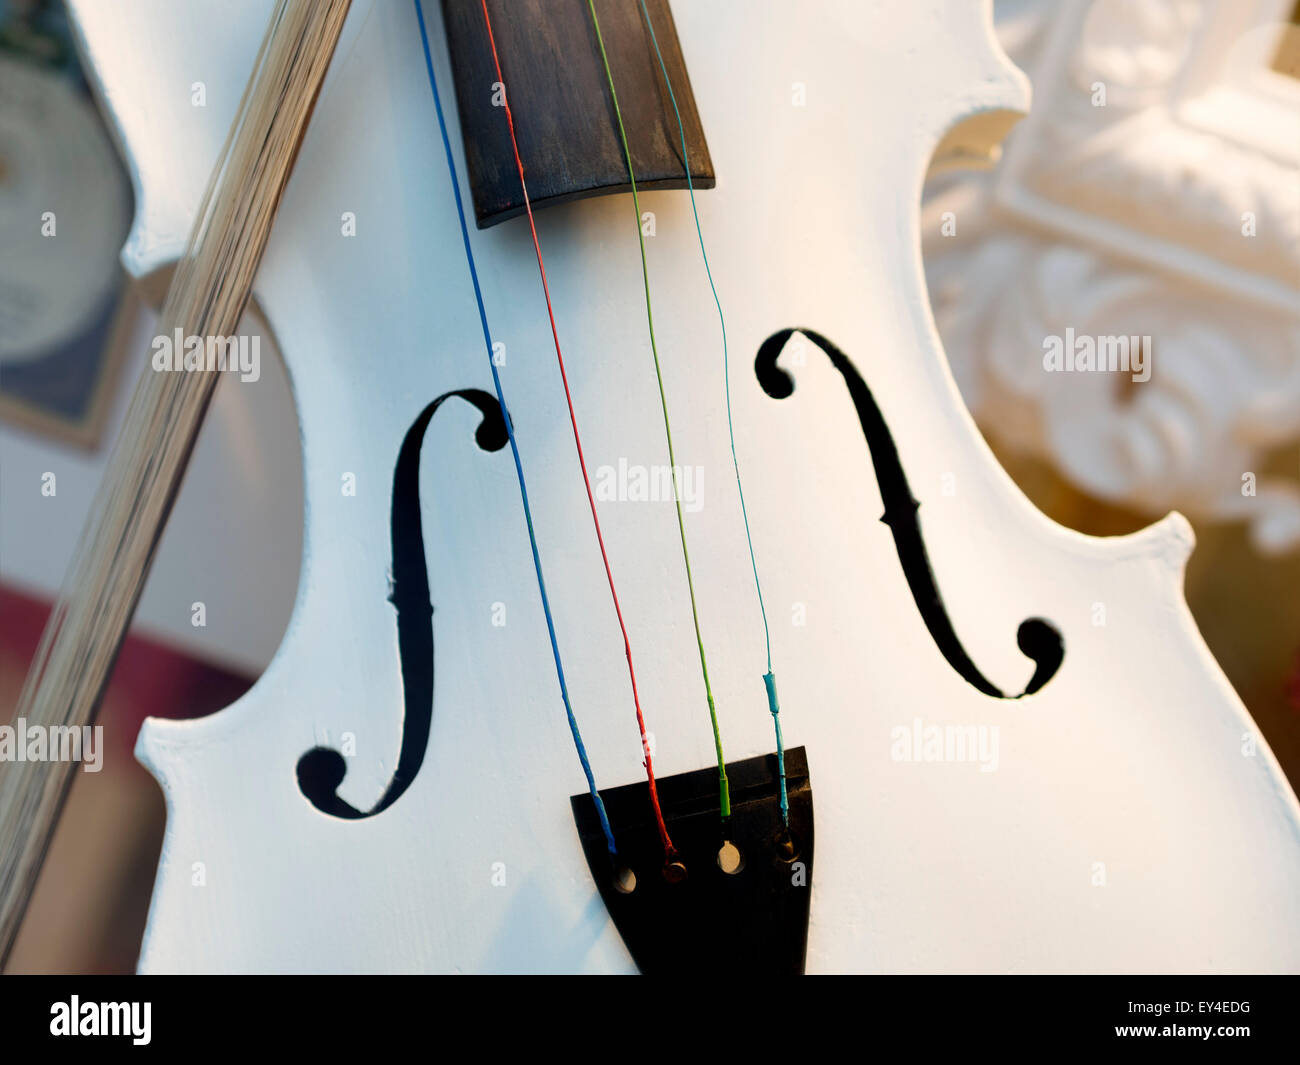 Image of a white violin with fiddlestick Stock Photo